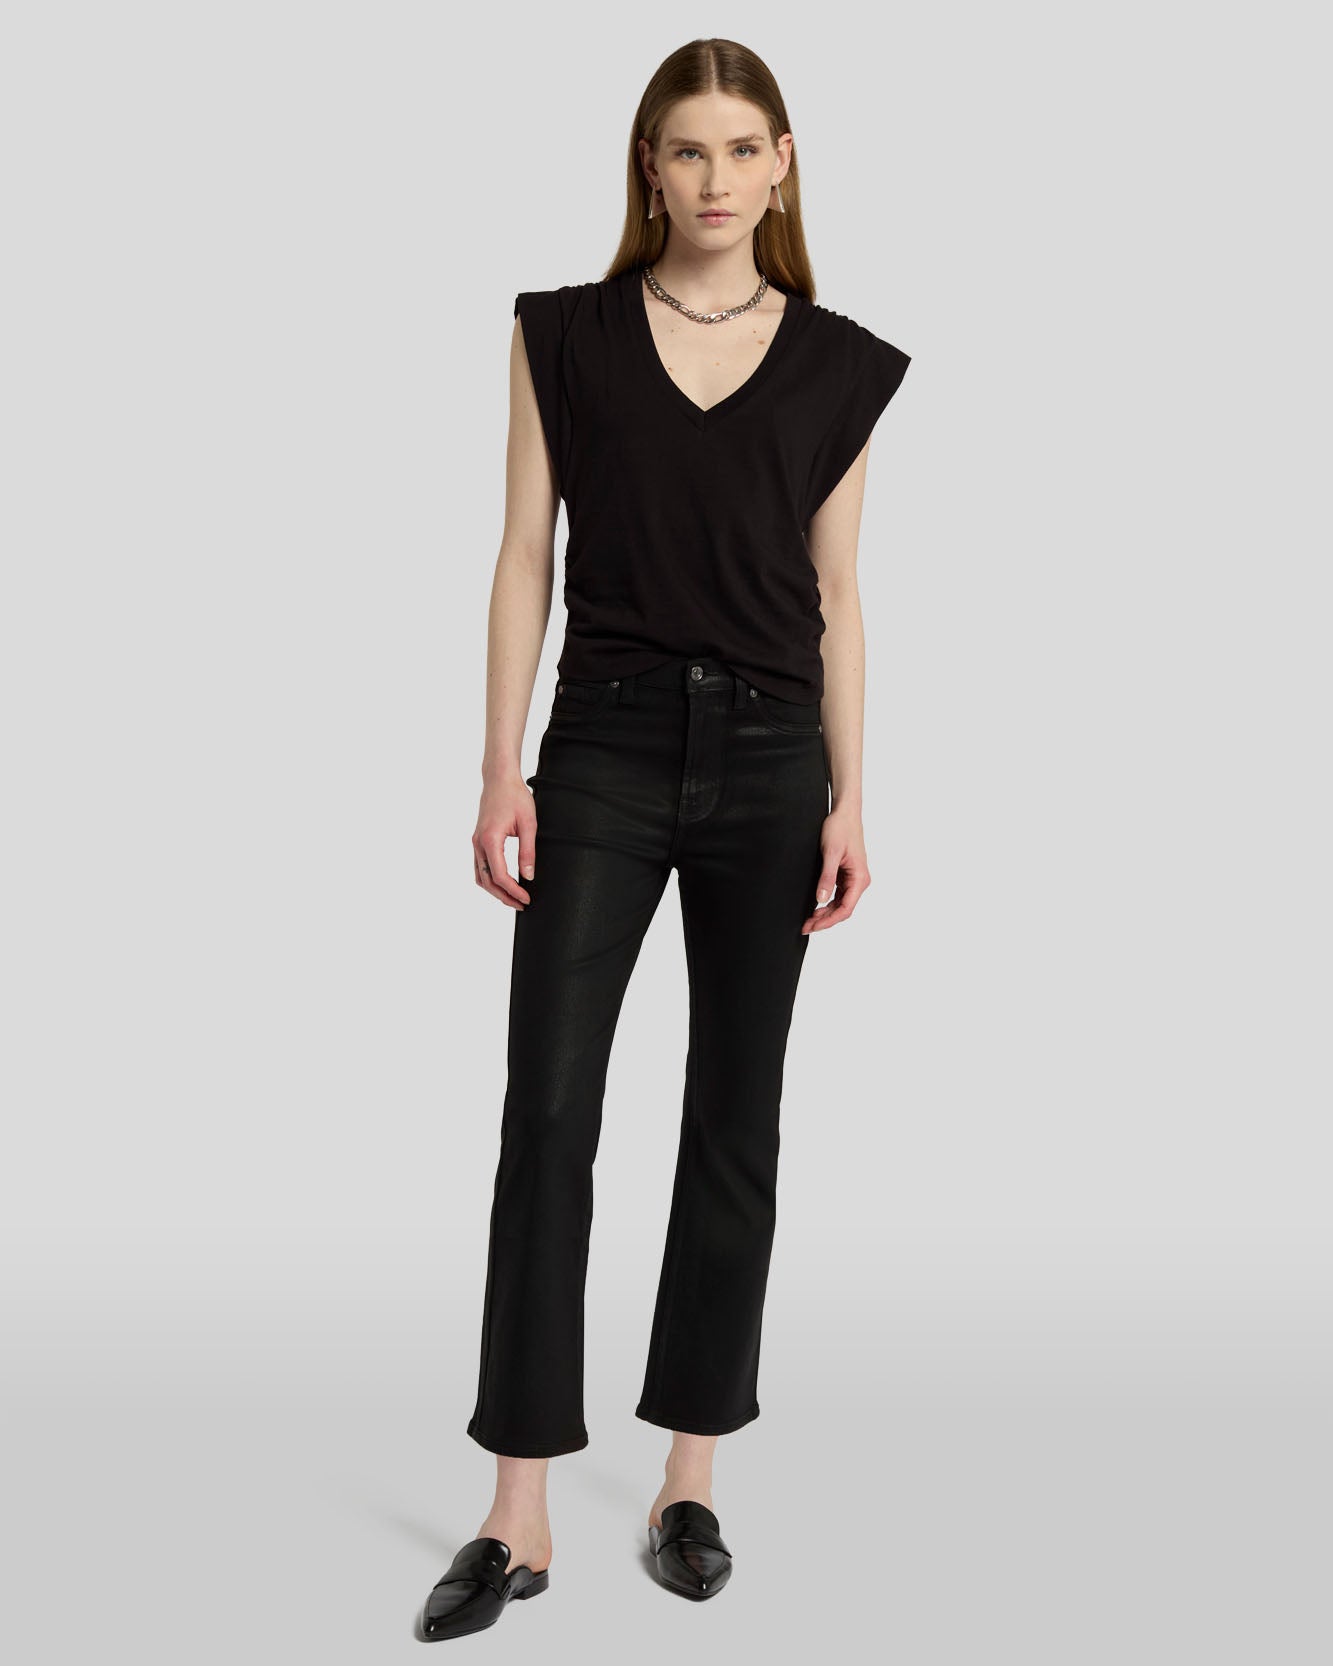 7 For All Mankind Seamed Legging With Ankle Zips In Black Leather Like, $79, .com